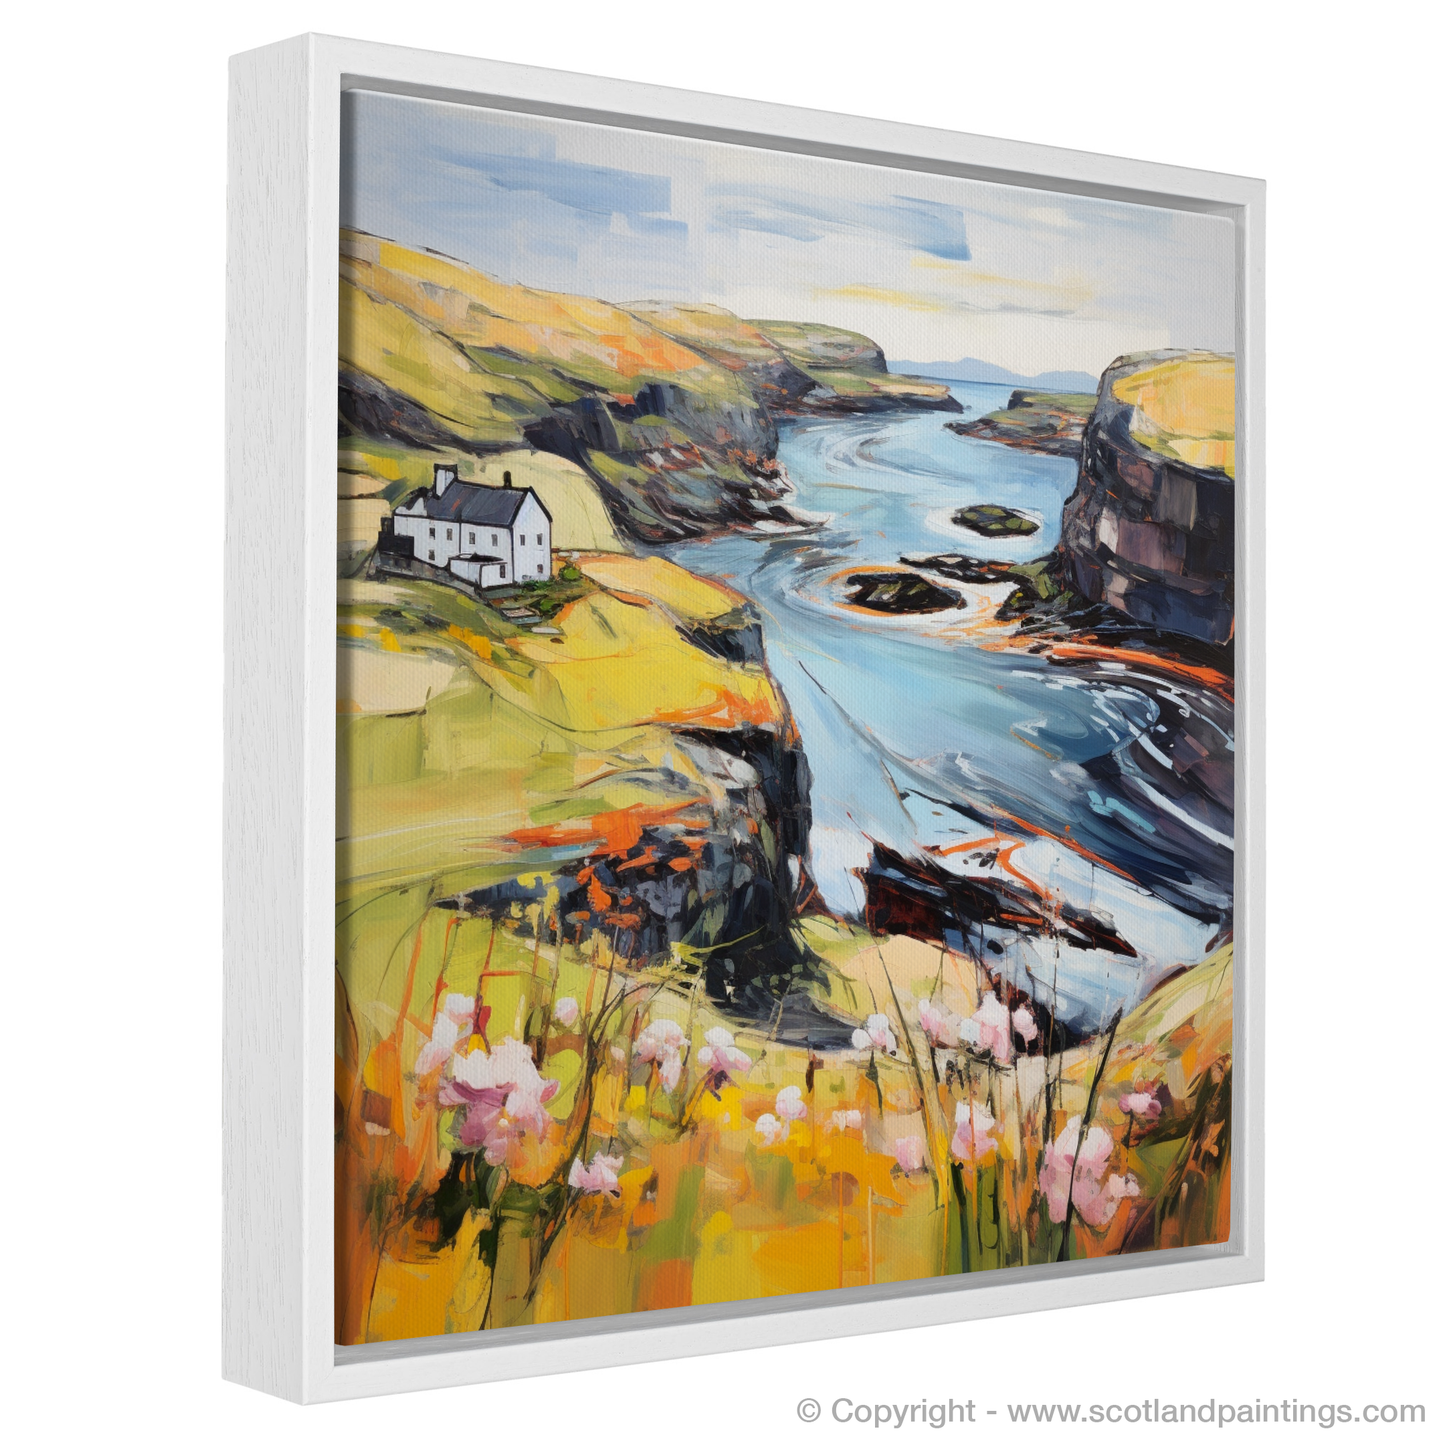 Painting and Art Print of Shetland, North of mainland Scotland in summer entitled "Summer Serenity in Shetland - A Contemporary Coastal Canvas".